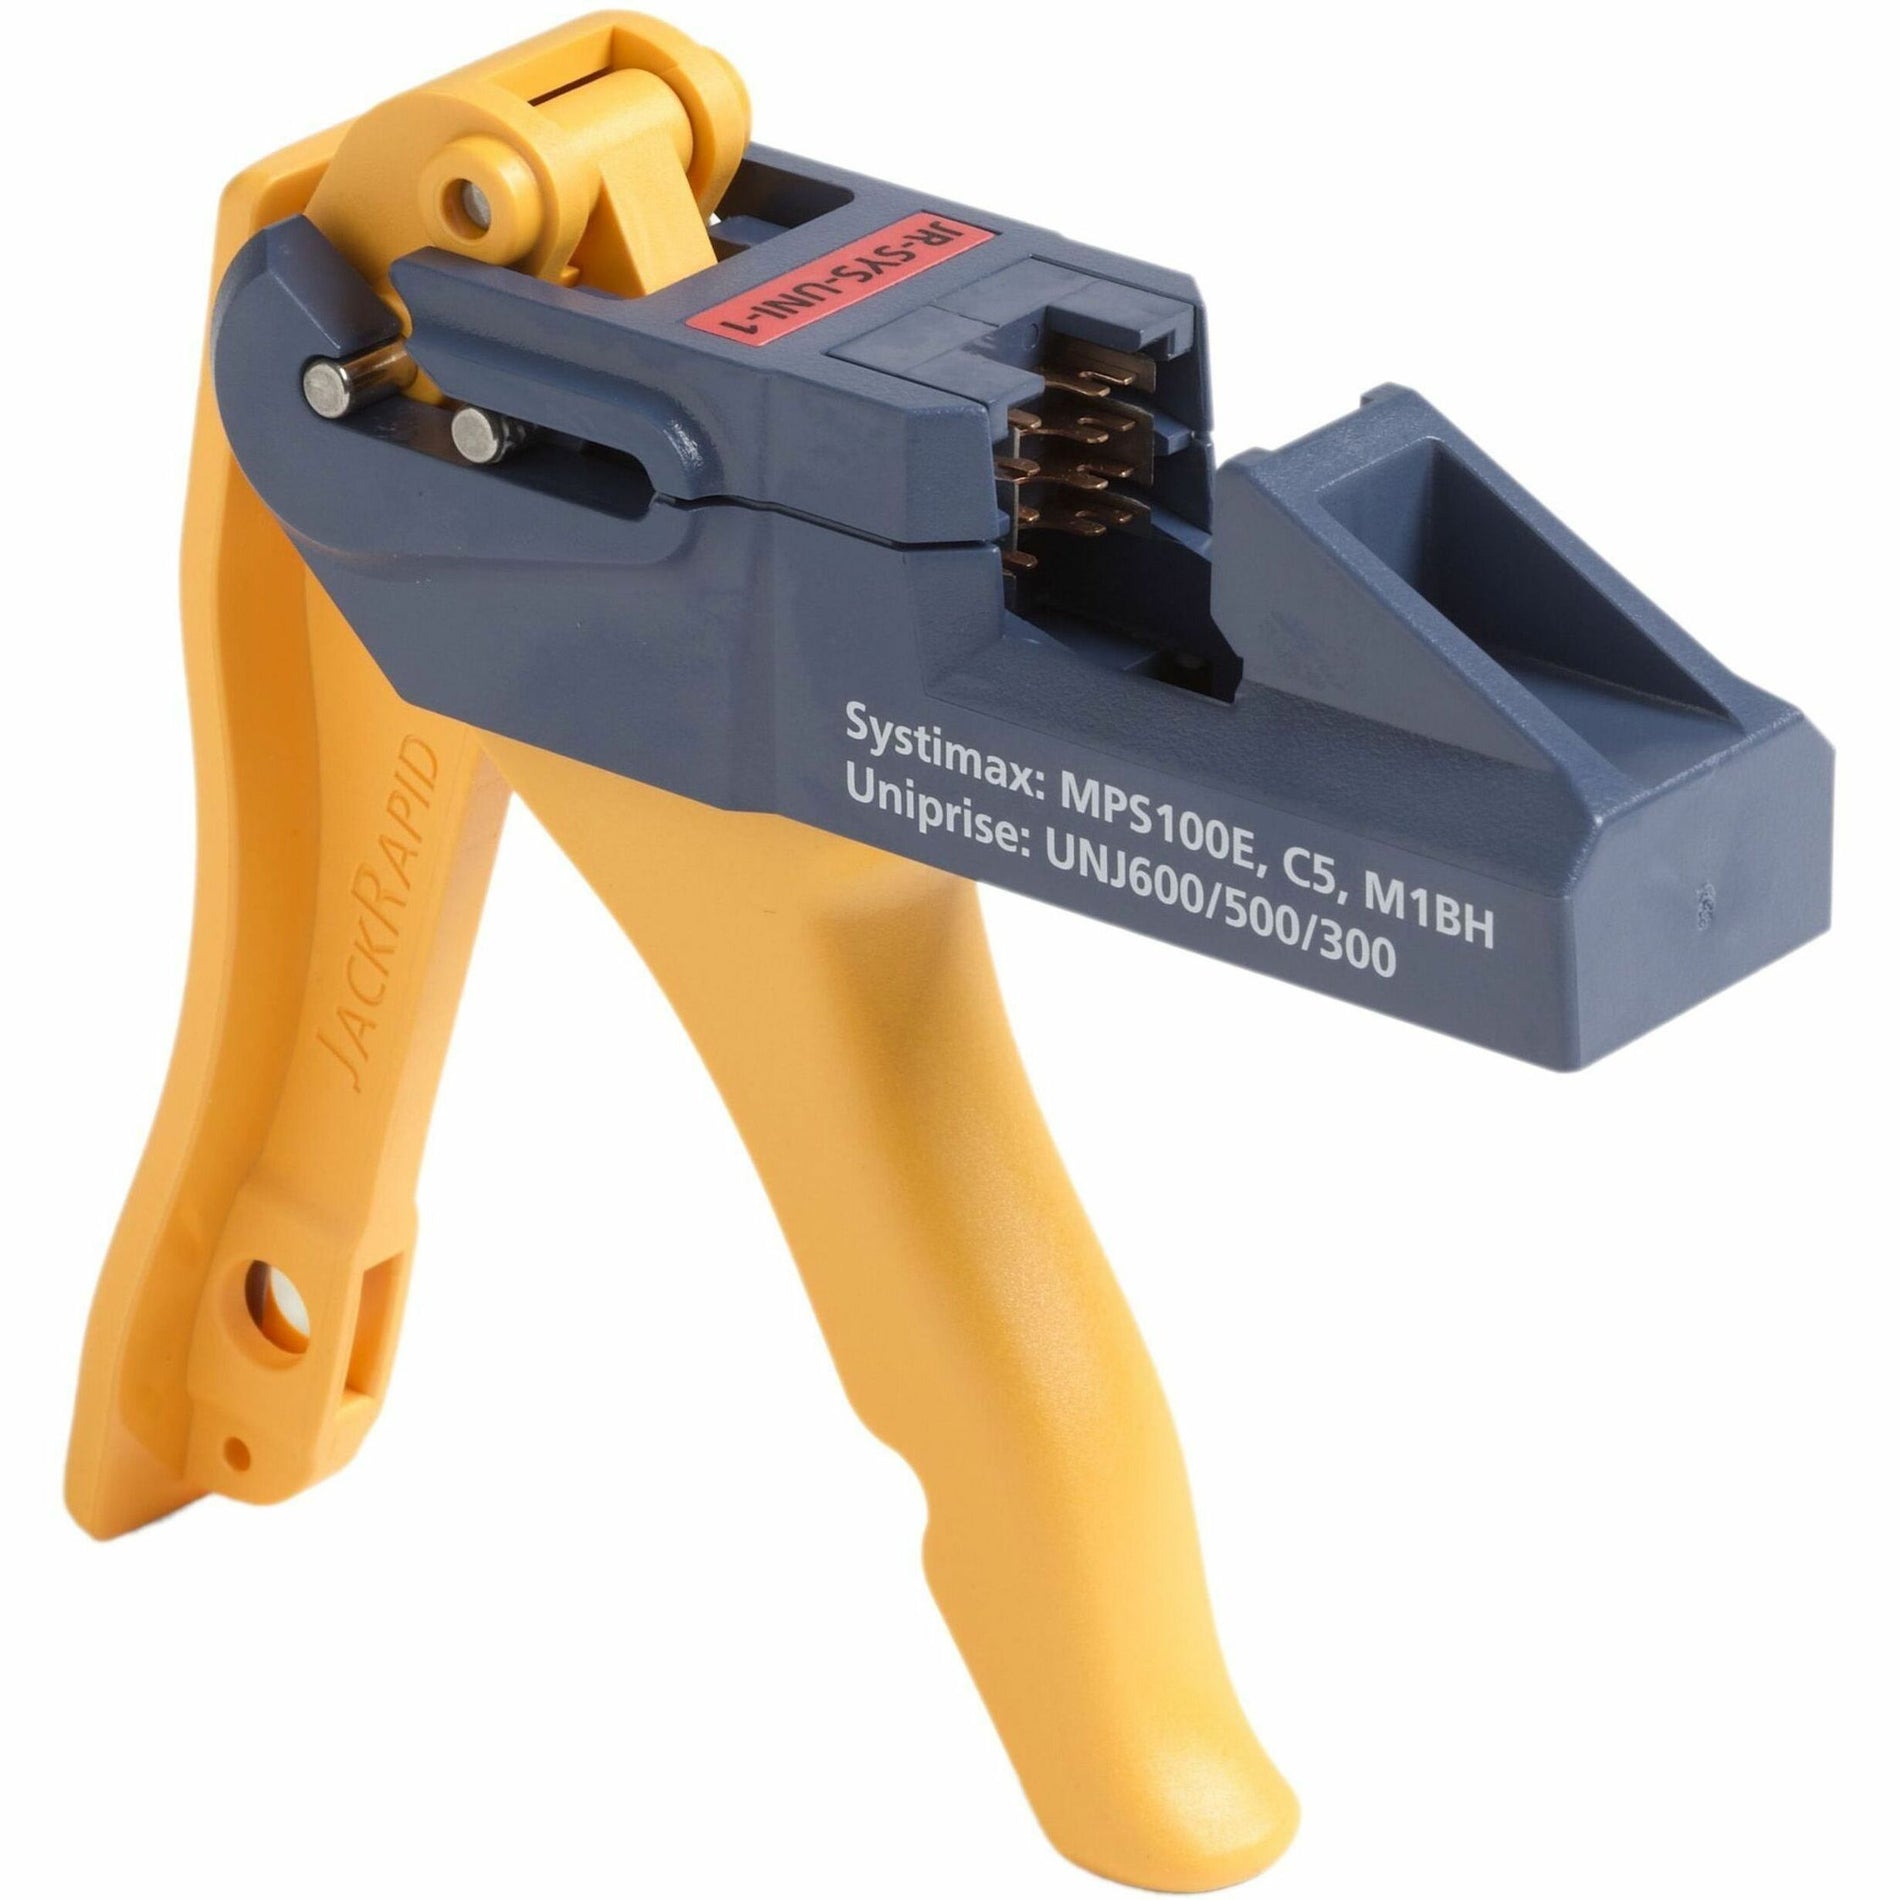 Fluke Networks JR-SYS-UNI-1 JackRapid Termination Tool, Cable Cutting and Termination